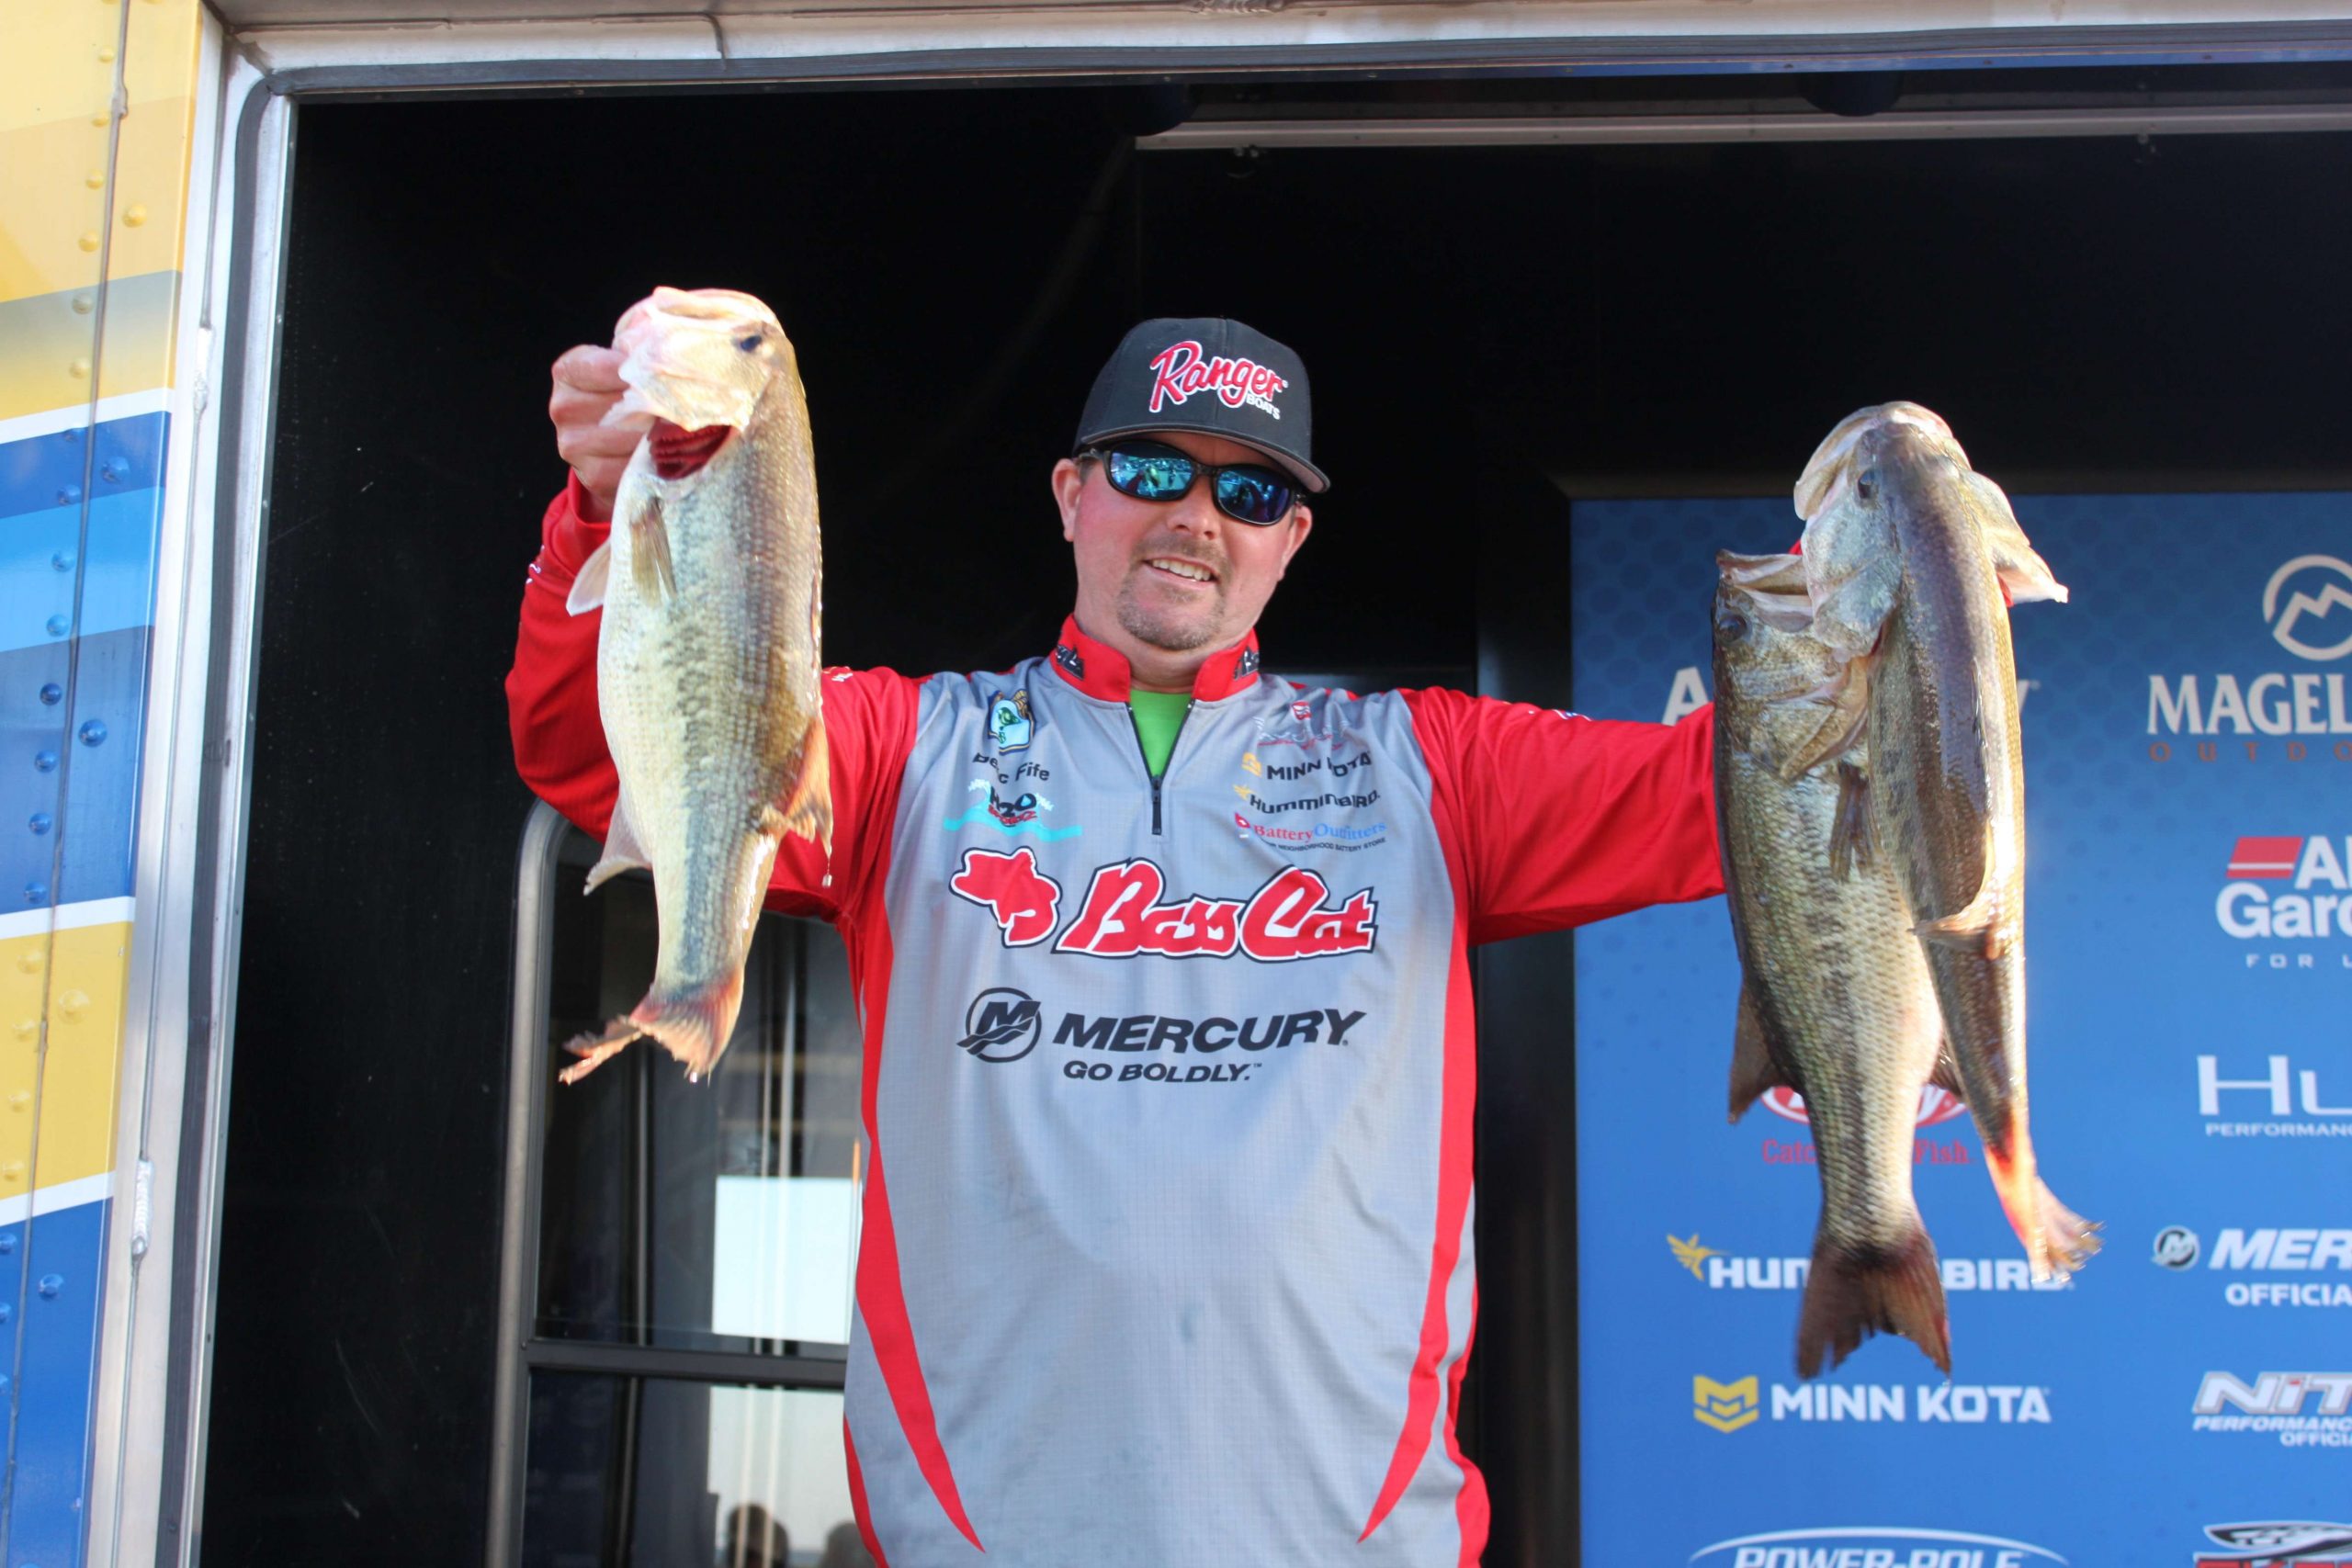 Deric Fife needs an extra hand, folks. Here, the Team Arkansas boater displays three beautiful bass that were part of a limit that has him in fourth place with 19-14.